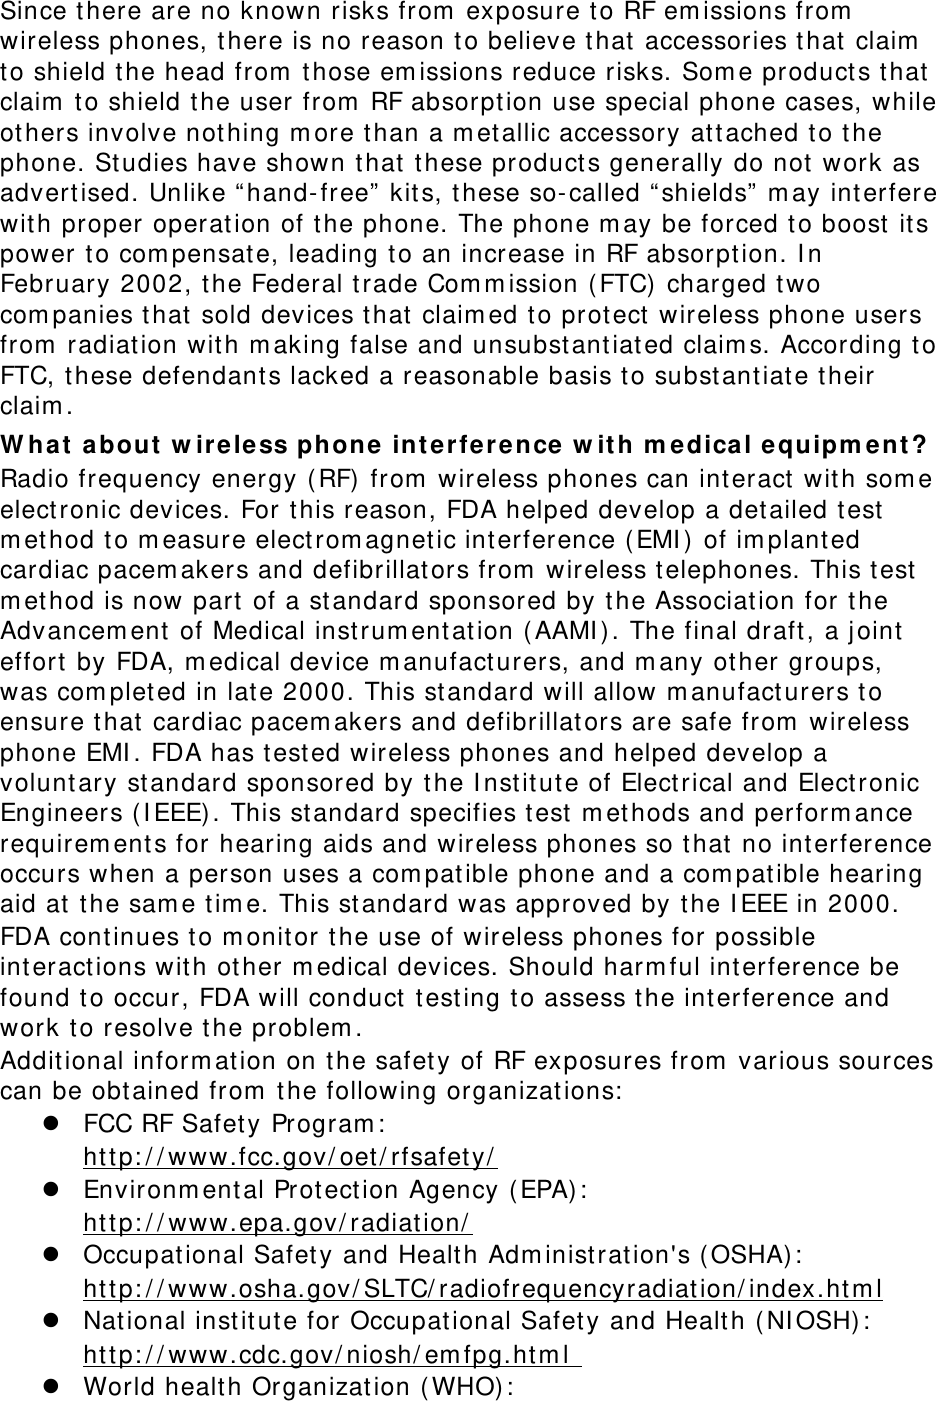   Since t here are no known risks from  exposure t o RF em issions from  wireless phones, t here is no reason to believe t hat accessories that  claim  to shield t he head from  those em issions reduce risks. Som e product s t hat claim  t o shield t he user from  RF absorpt ion use special phone cases, while others involve nothing m ore than a m et allic accessory attached t o t he phone. Studies have shown t hat these product s generally do not work as advert ised. Unlike “ hand-free”  kits, t hese so- called “ shields”  m ay int erfere with proper operation of t he phone. The phone m ay be forced t o boost  its power t o com pensat e, leading to an increase in RF absorpt ion. I n February 2002, the Federal t rade Com m ission (FTC) charged two com panies t hat sold devices that  claim ed t o prot ect wireless phone users from  radiat ion wit h m aking false and unsubst ant iated claim s. According t o FTC, these defendants lacked a reasonable basis t o subst antiate t heir claim . W ha t about  w ir ele ss phone  int erfer ence w ith m e dical e qu ipm ent ? Radio frequency energy (RF)  from  wireless phones can int eract  wit h som e elect ronic devices. For t his reason, FDA helped develop a det ailed test m ethod t o m easure elect rom agnet ic int erference ( EMI )  of im plant ed cardiac pacem akers and defibrillators from  wireless t elephones. This t est m ethod is now part  of a standard sponsored by t he Association for t he Advancem ent of Medical inst rum ent at ion ( AAMI ) . The final draft , a j oint effort  by FDA, m edical device m anufact urers, and m any other groups, was com pleted in lat e 2000. This standard will allow m anufact urers to ensure that cardiac pacem akers and defibrillators are safe from  wireless phone EMI . FDA has t est ed wireless phones and helped develop a volunt ary standard sponsored by the I nst itute of Electrical and Elect ronic Engineers ( I EEE) . This st andard specifies t est  m ethods and perform ance requirem ent s for hearing aids and wireless phones so t hat no interference occurs when a person uses a com patible phone and a com patible hearing aid at  t he sam e tim e. This st andard was approved by the I EEE in 2000. FDA cont inues to m onitor t he use of wireless phones for possible int eract ions with ot her m edical devices. Should harm ful interference be found t o occur, FDA will conduct  t esting t o assess t he int erference and work t o resolve t he problem . Additional inform at ion on t he safet y of RF exposures from  various sources can be obtained from  the following organizations:  z FCC RF Safet y Program :   Uht tp: / / www.fcc.gov/ oet / rfsafet y/ U z Environm ent al Prot ection Agency ( EPA) :   Uht tp: / / www.epa.gov/ radiation/ U z Occupational Safety and Health Adm inist rat ion&apos;s ( OSHA) :          Uht tp: / / www.osha.gov/ SLTC/ radiofrequencyradiation/ index.htm lU z Nat ional inst itute for Occupat ional Safety and Health ( NI OSH) :   Uht tp: / / www.cdc.gov/ niosh/ em fpg.ht m l   z World health Organization (WHO) :  